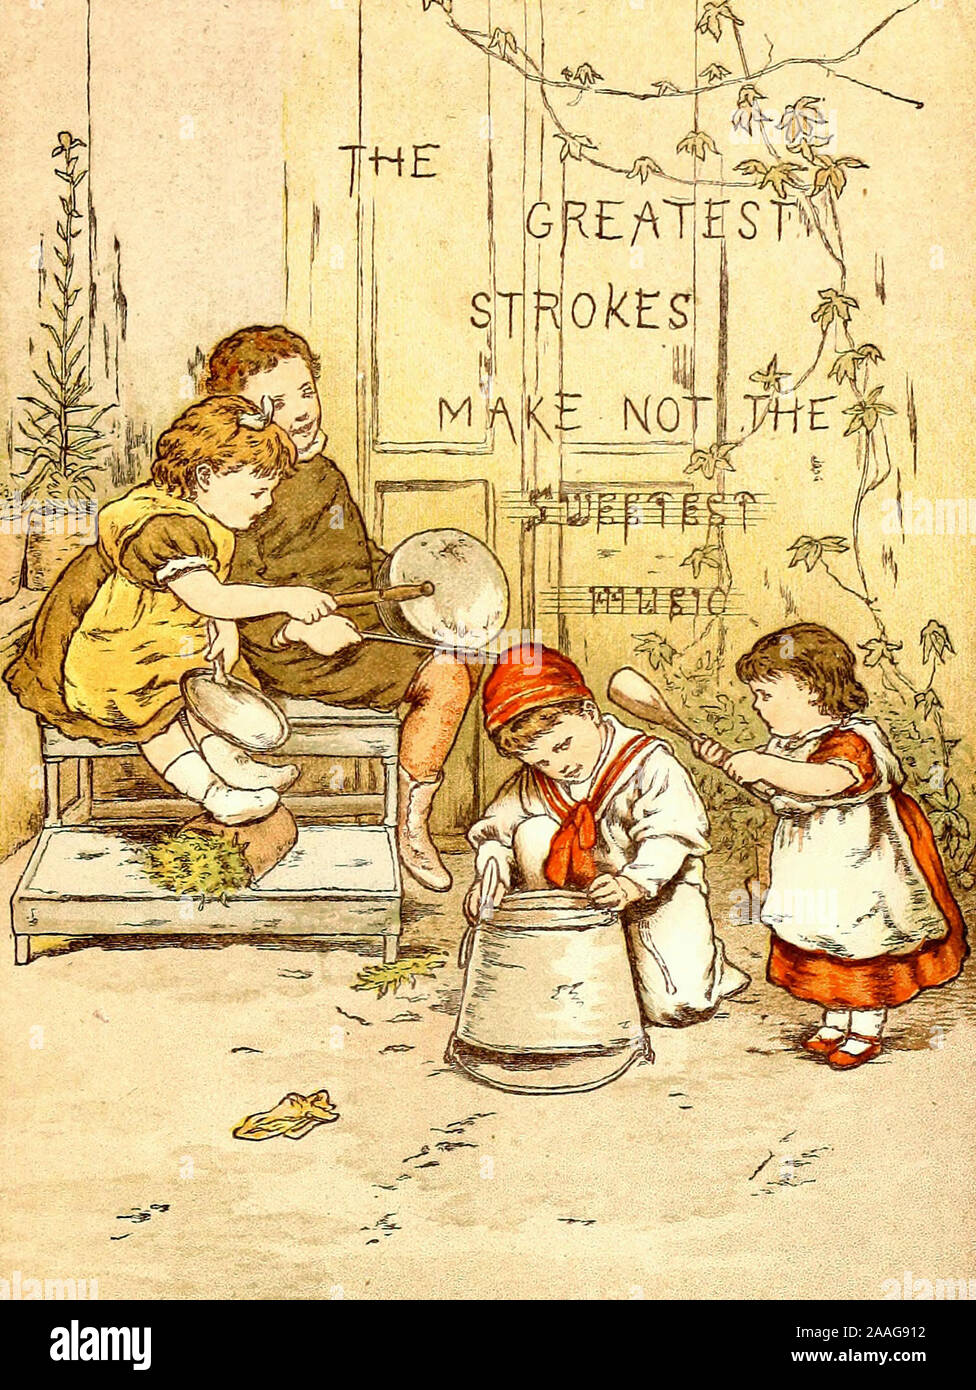 The Greatest Strokes make not the Sweetest Music - A Vintage Illustration of an Old Proverb Stock Photo